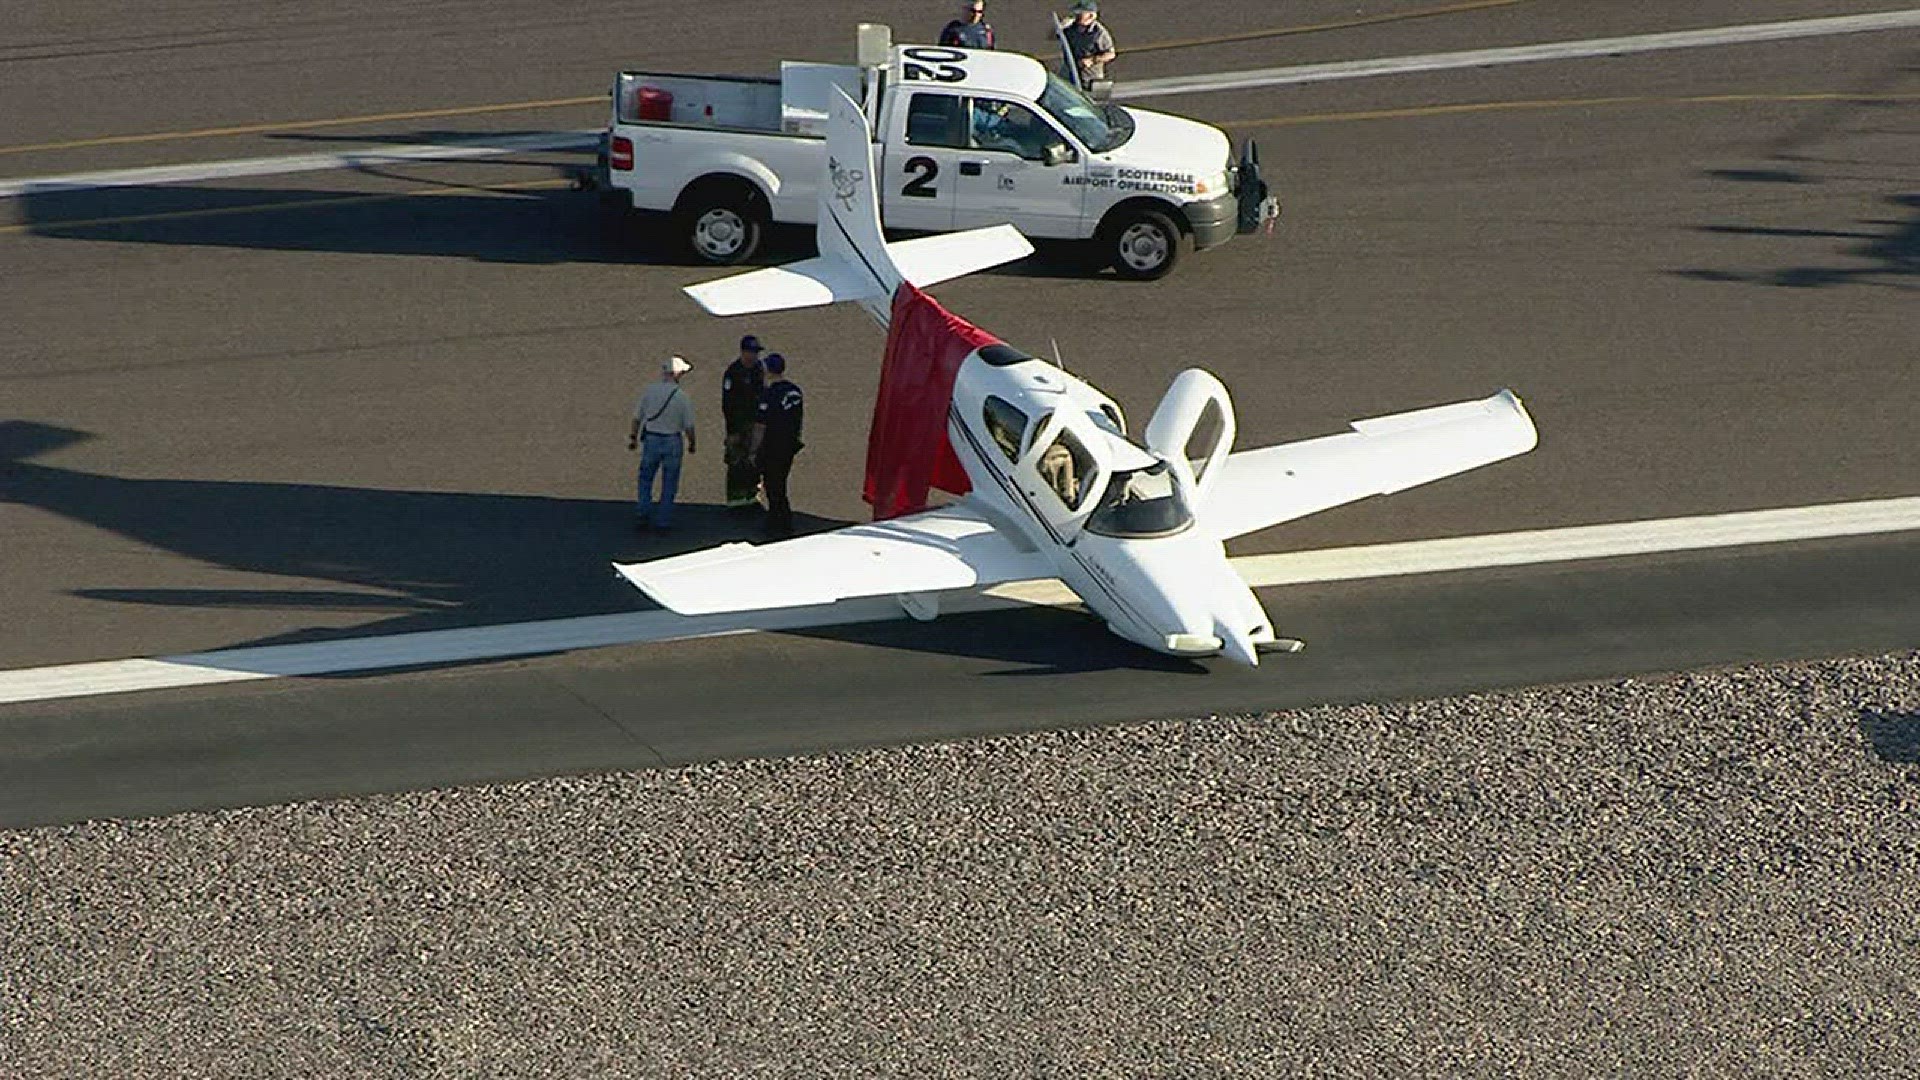 A landing gear malfunction caused a plane to skid off the runway at Scottsdale Airport.